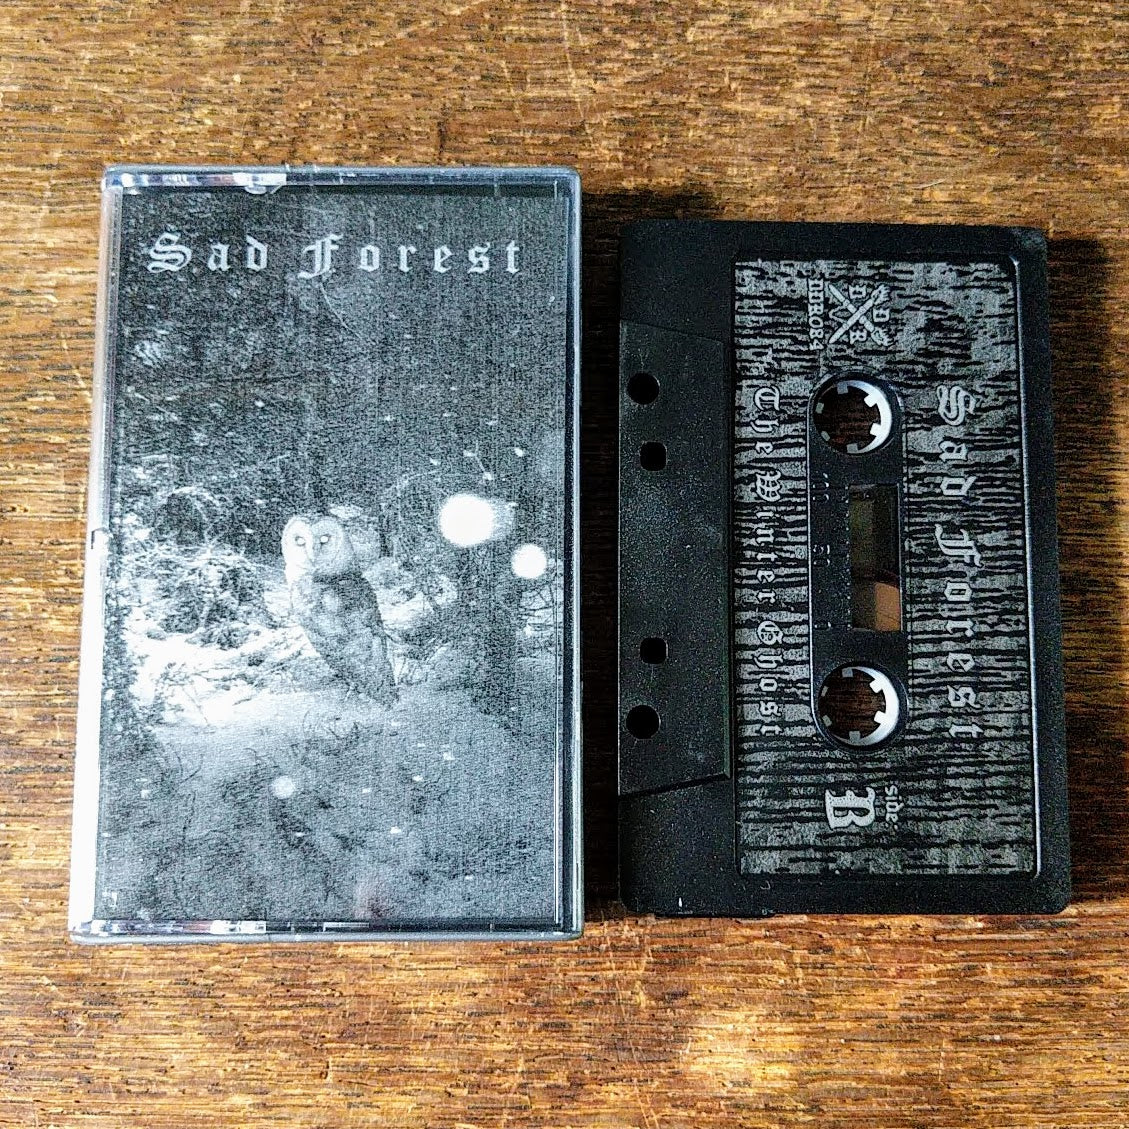 [SOLD OUT] SAD FOREST "The Winter Ghost" Cassette Tape